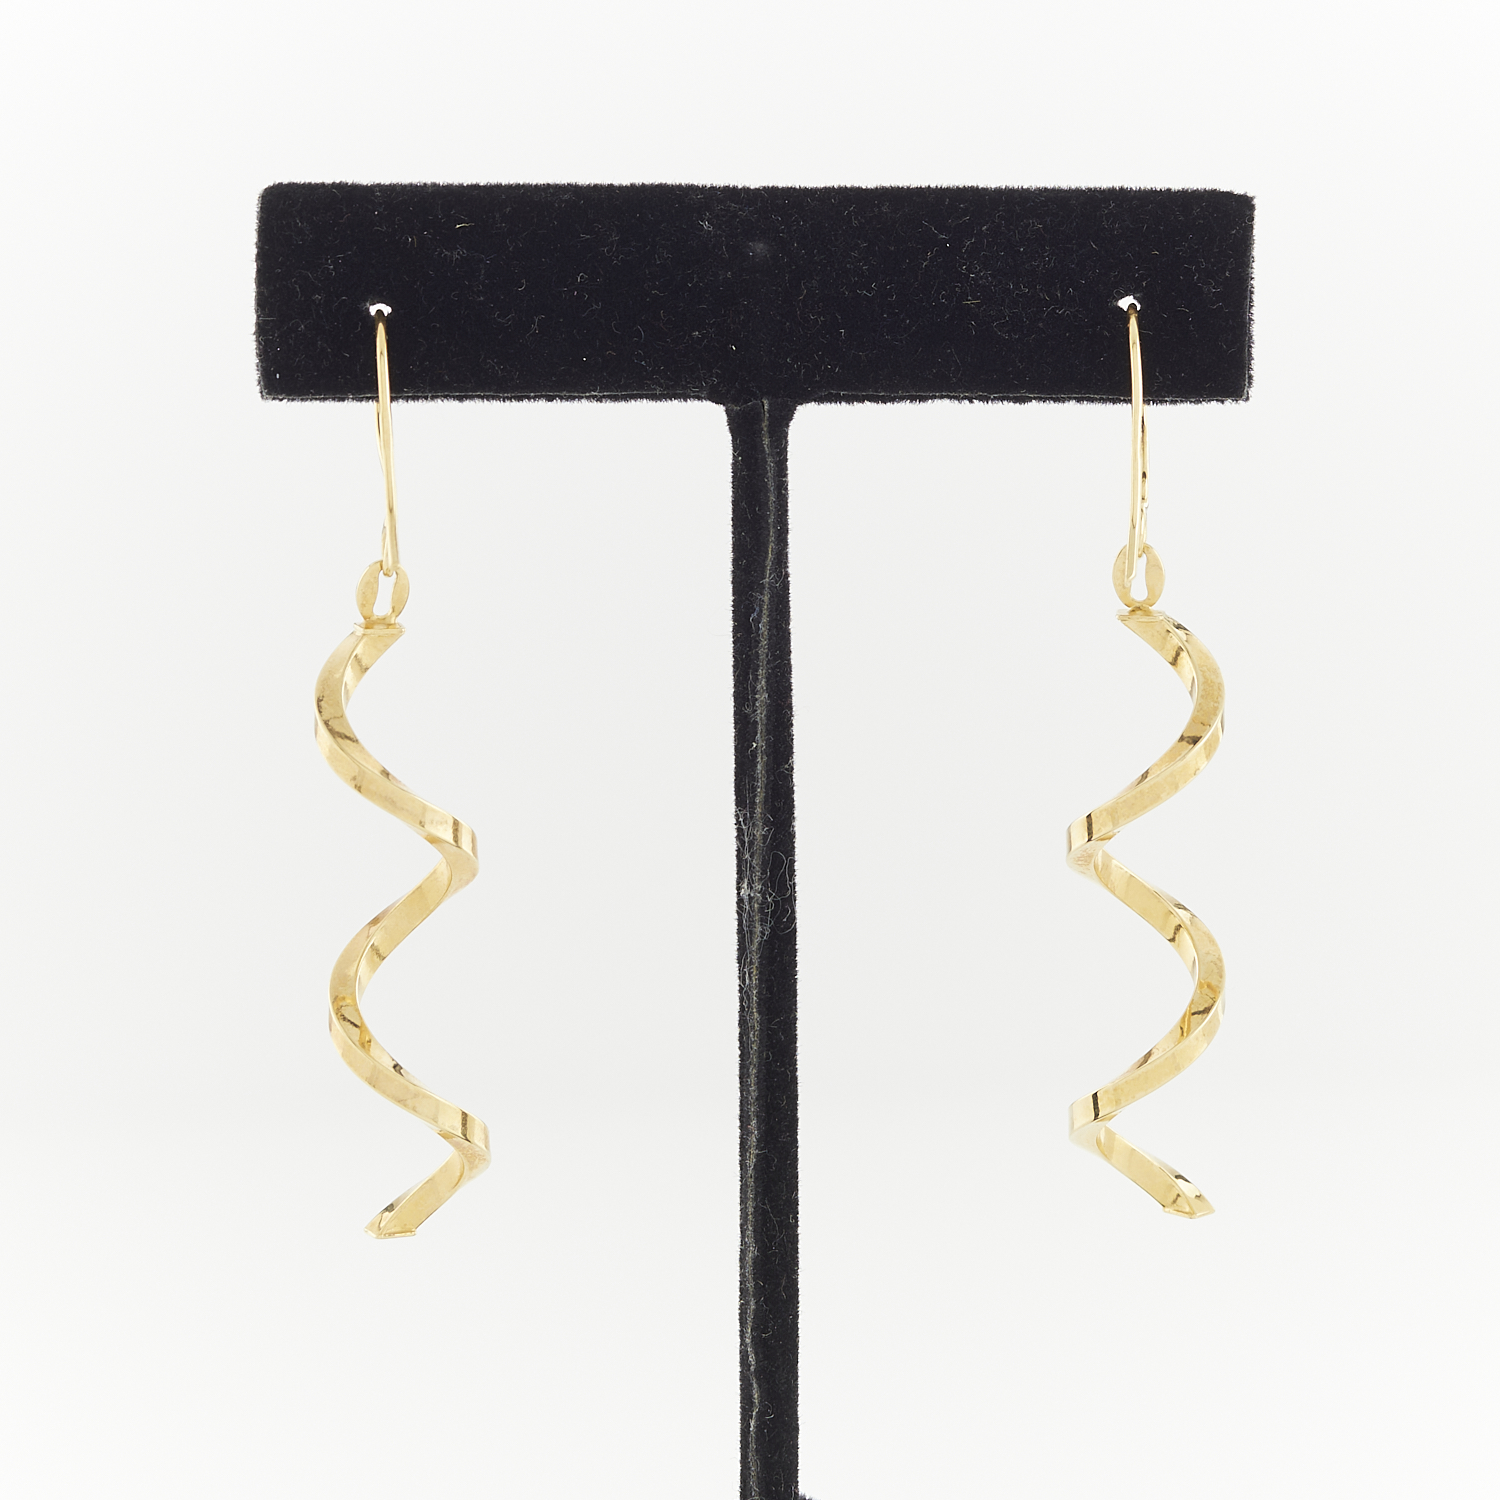 Italian 14k Yellow Gold Spiral Statement Earrings - Image 4 of 8